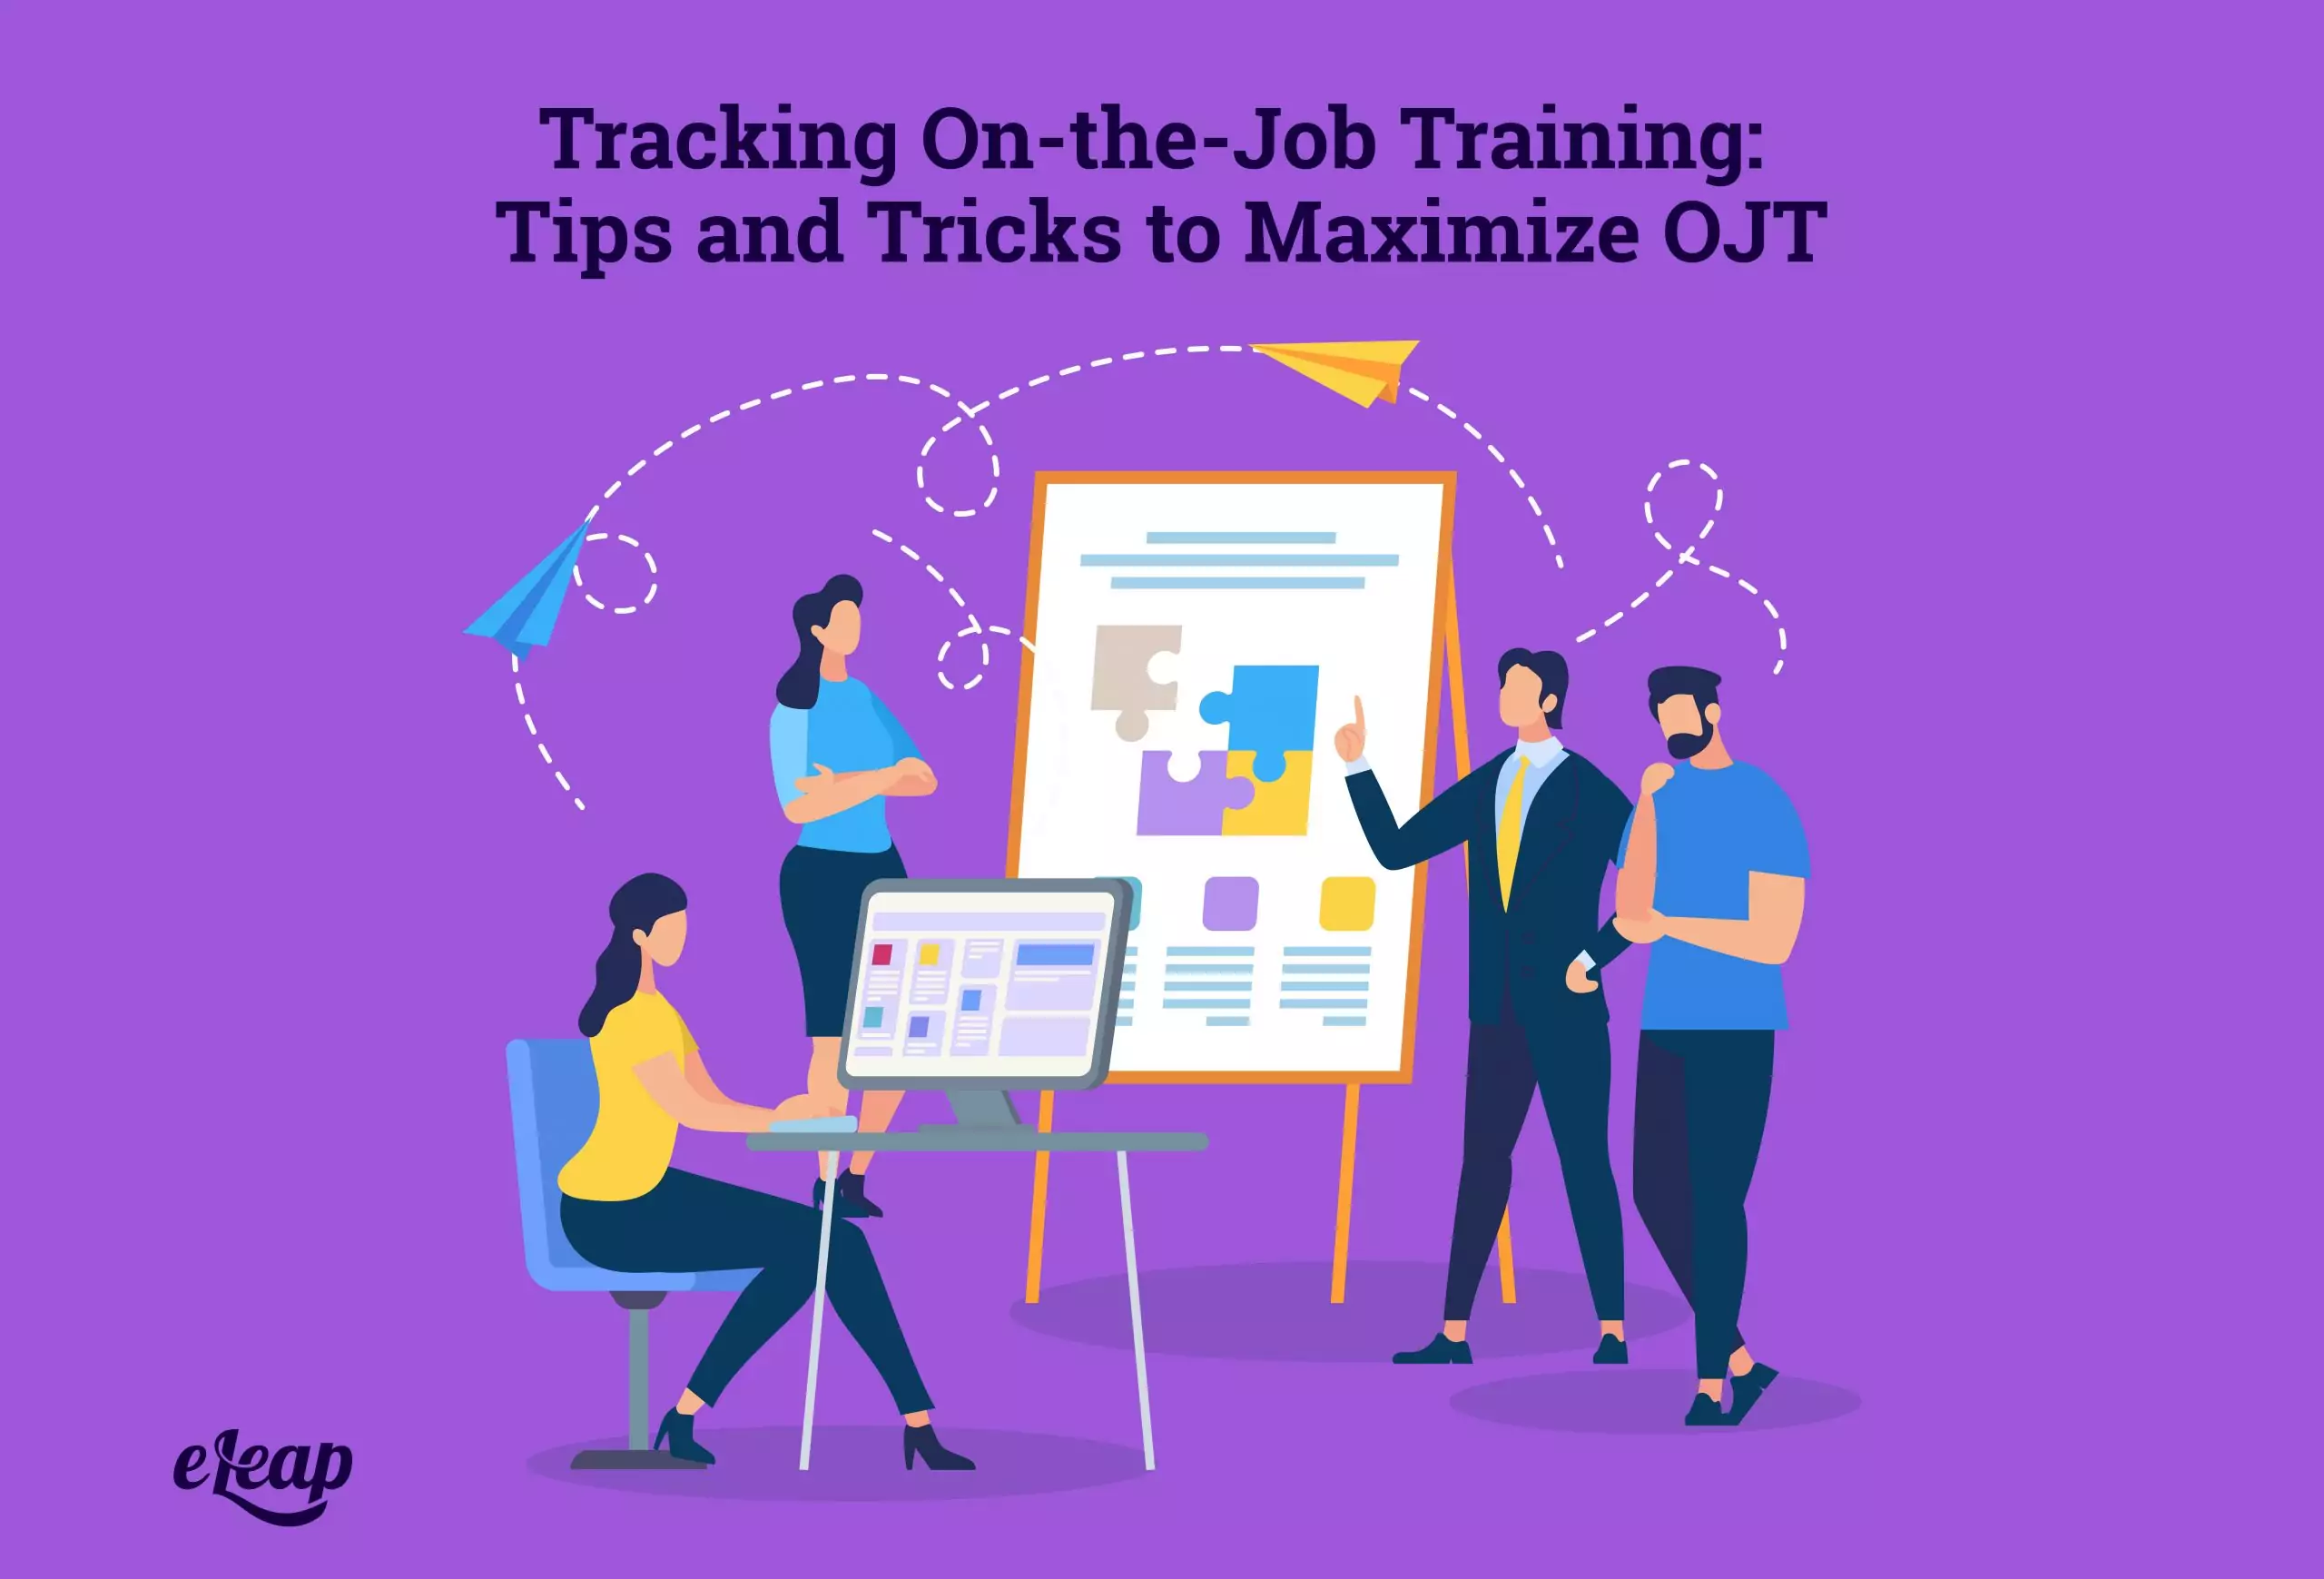 Tracking On the Job Training: Tips and Tricks to Maximize OJT